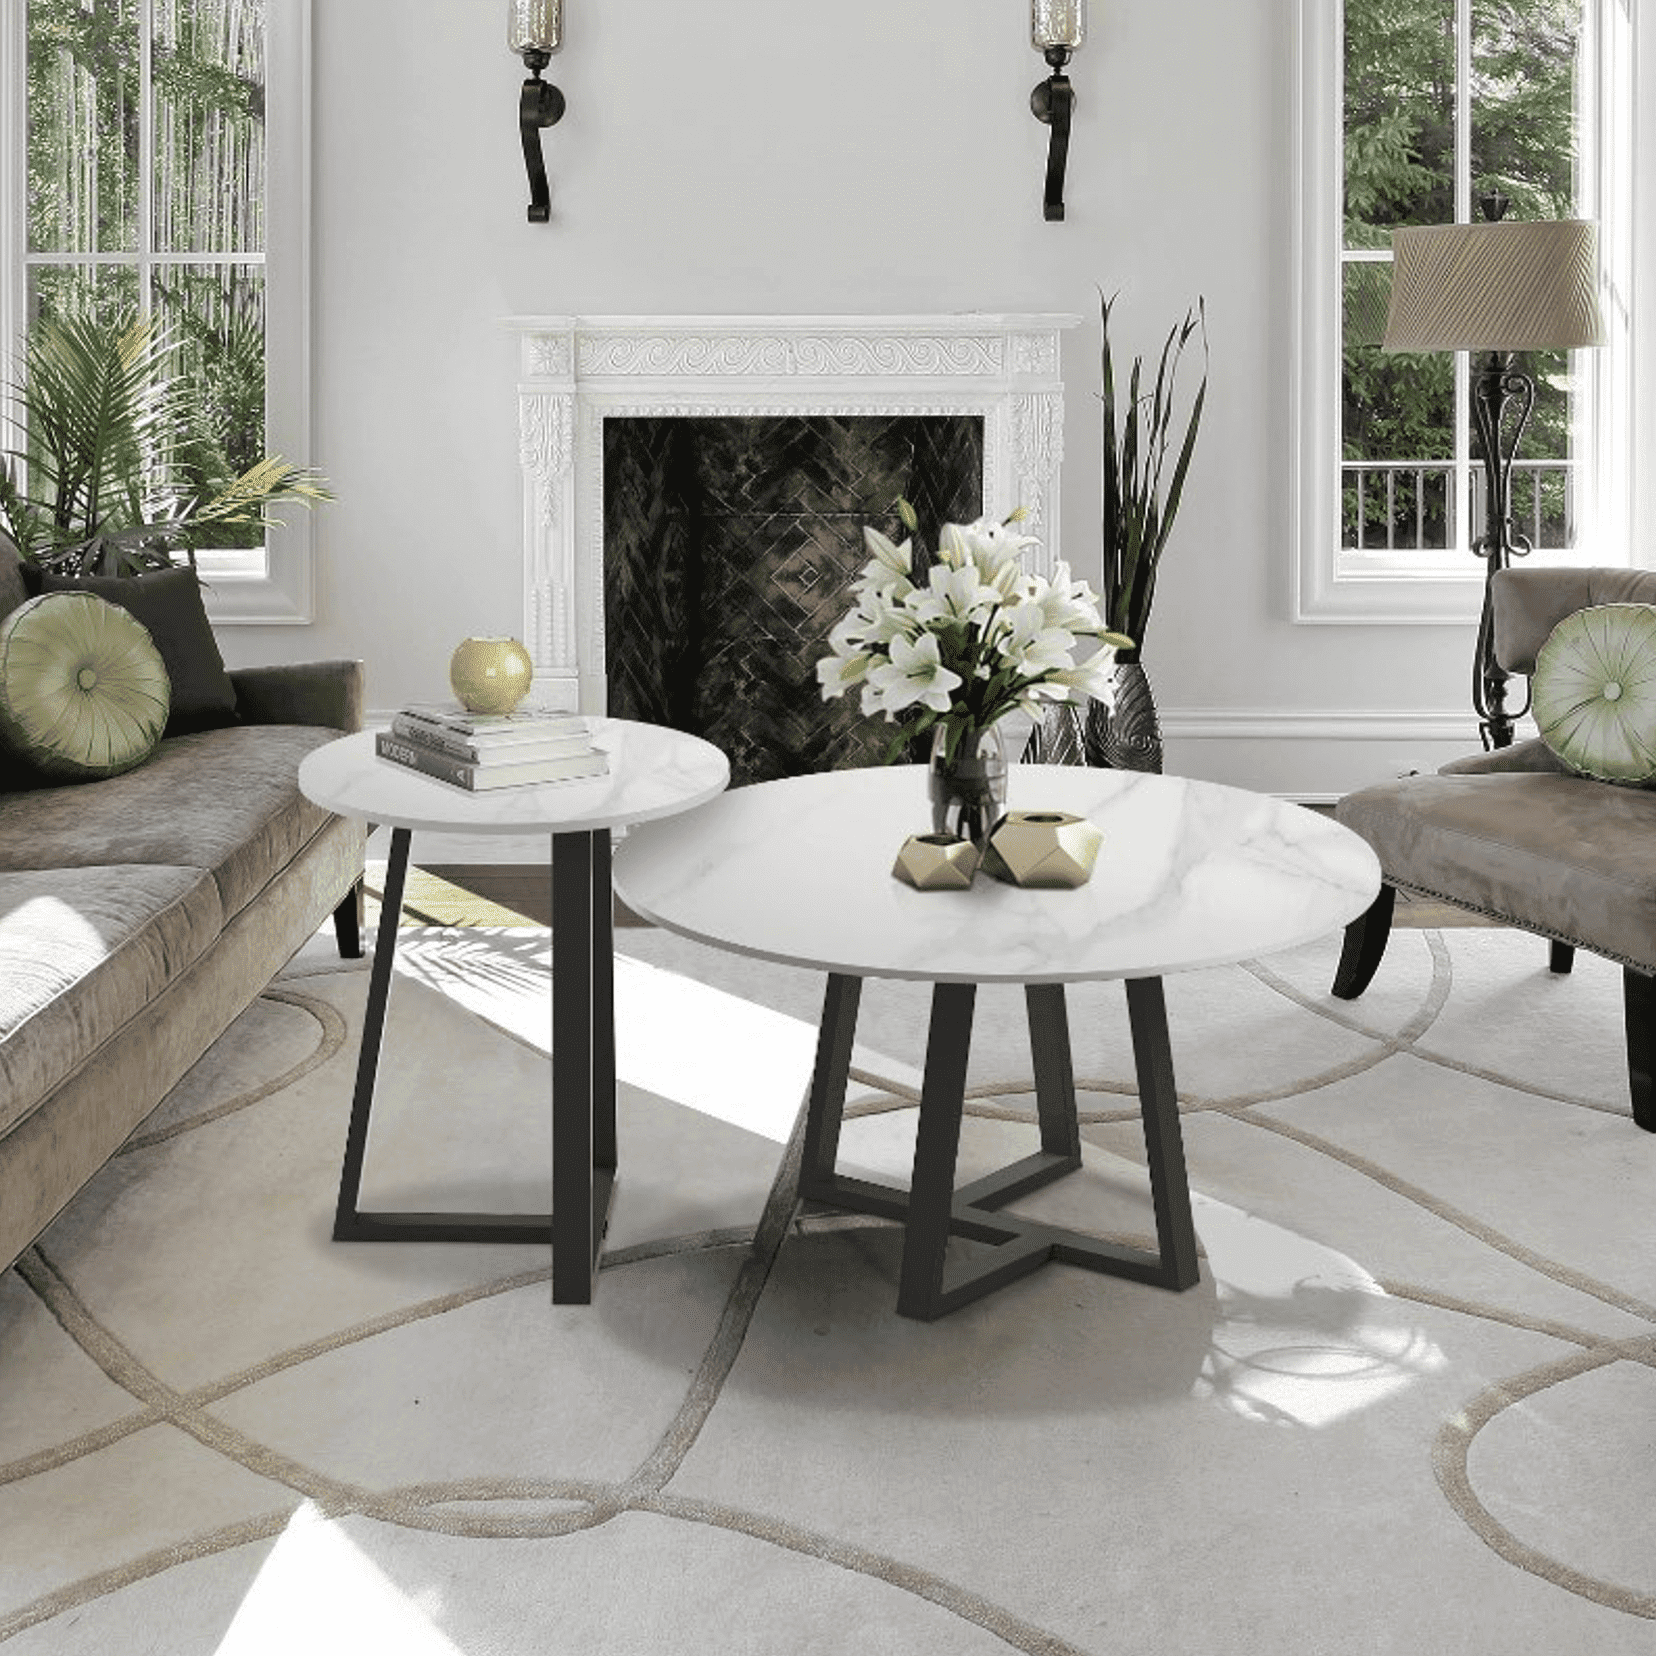 Interior Ave - Broadway Two Tier Marble White Stone Coffee Table Set-Upinteriors